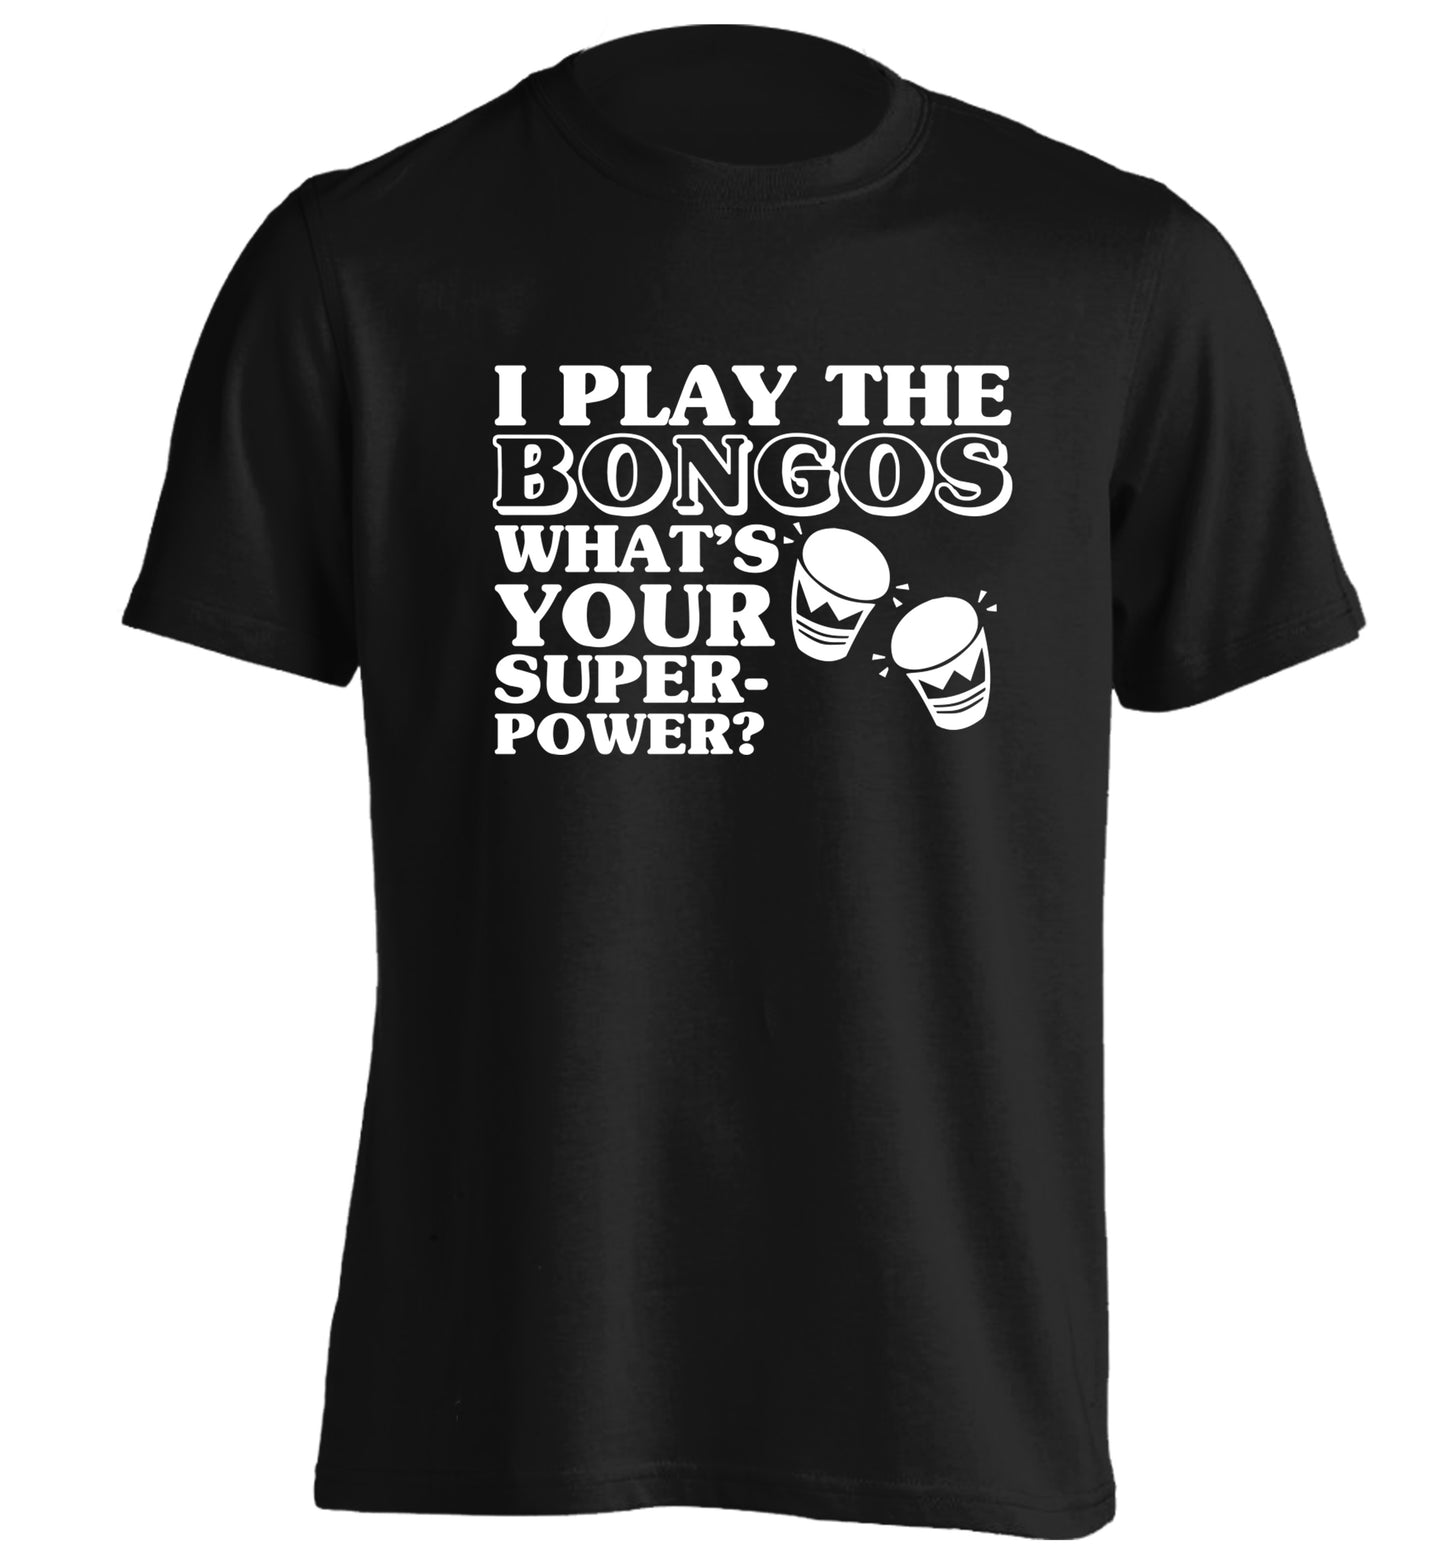 I play the bongos what's your superpower? adults unisexblack Tshirt 2XL